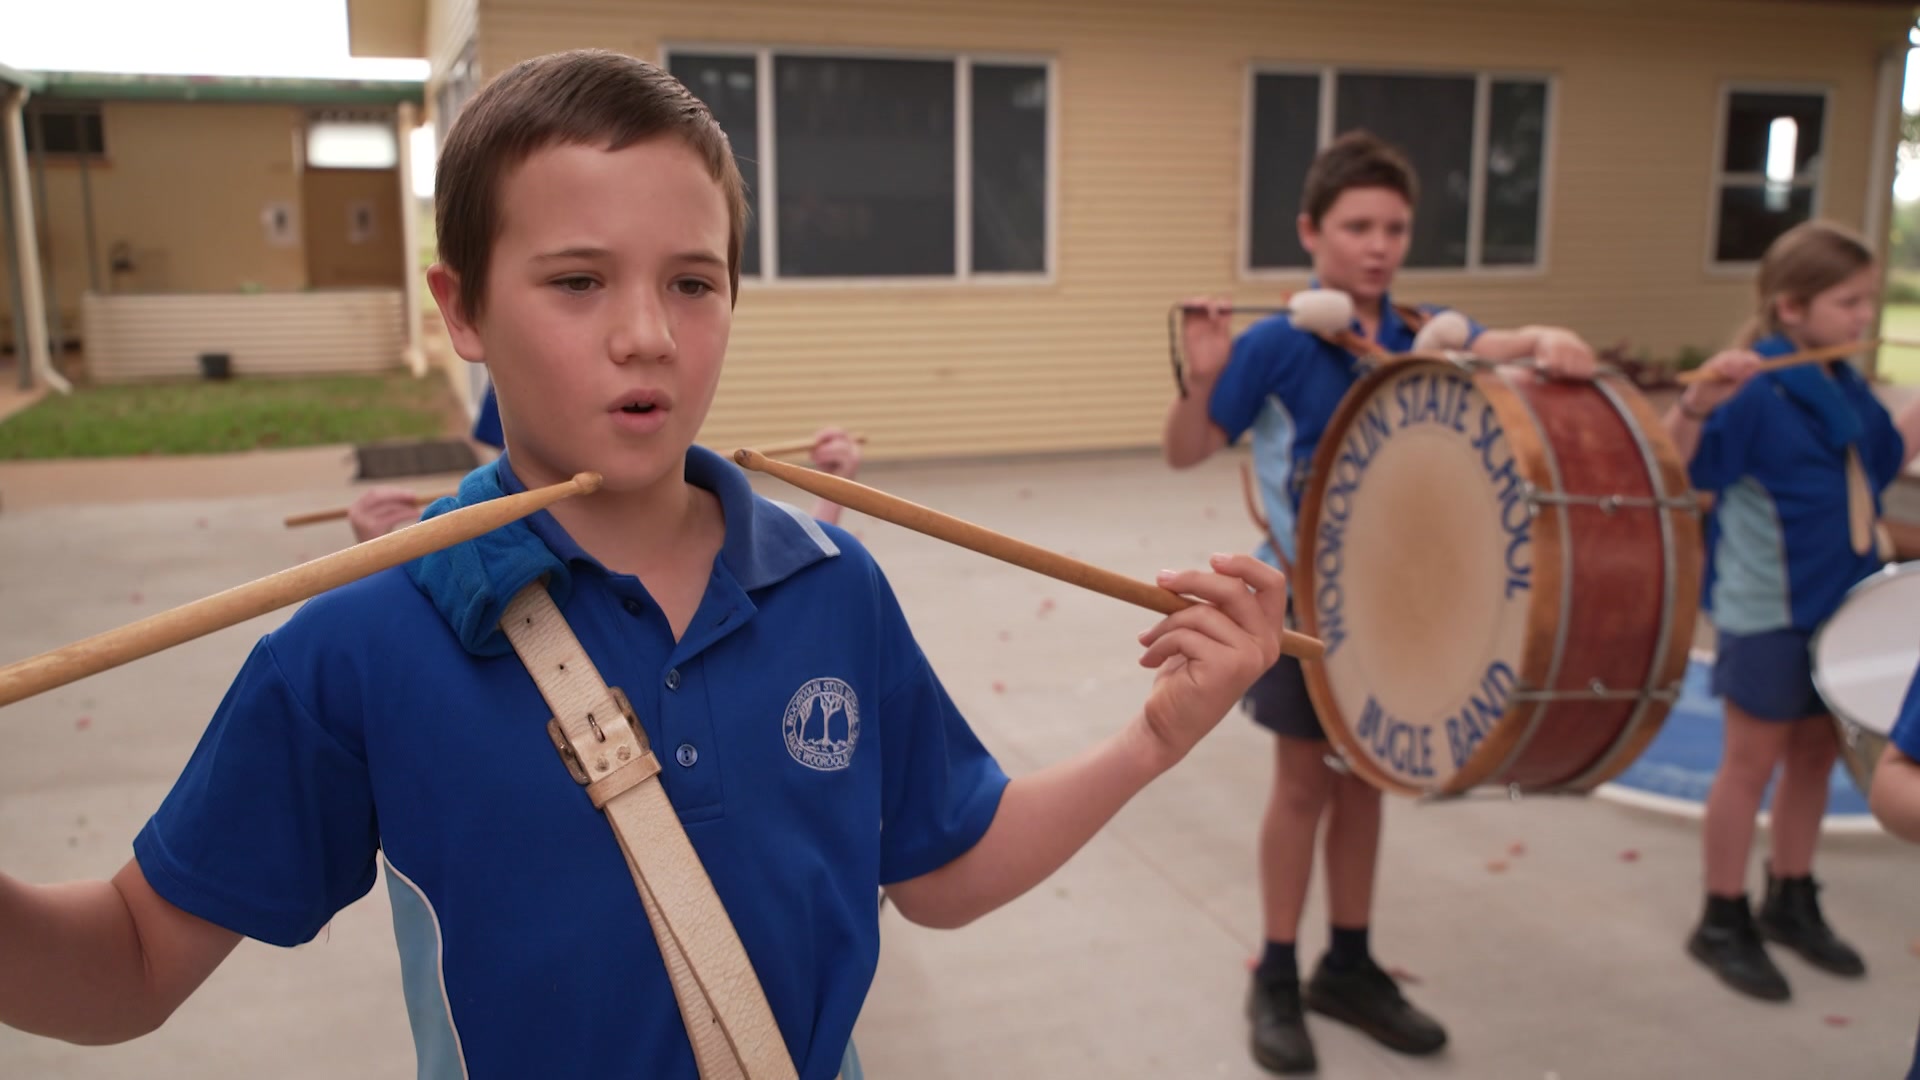 Young boy plays the drum in a marching band. He is wearing a blue school uniform.